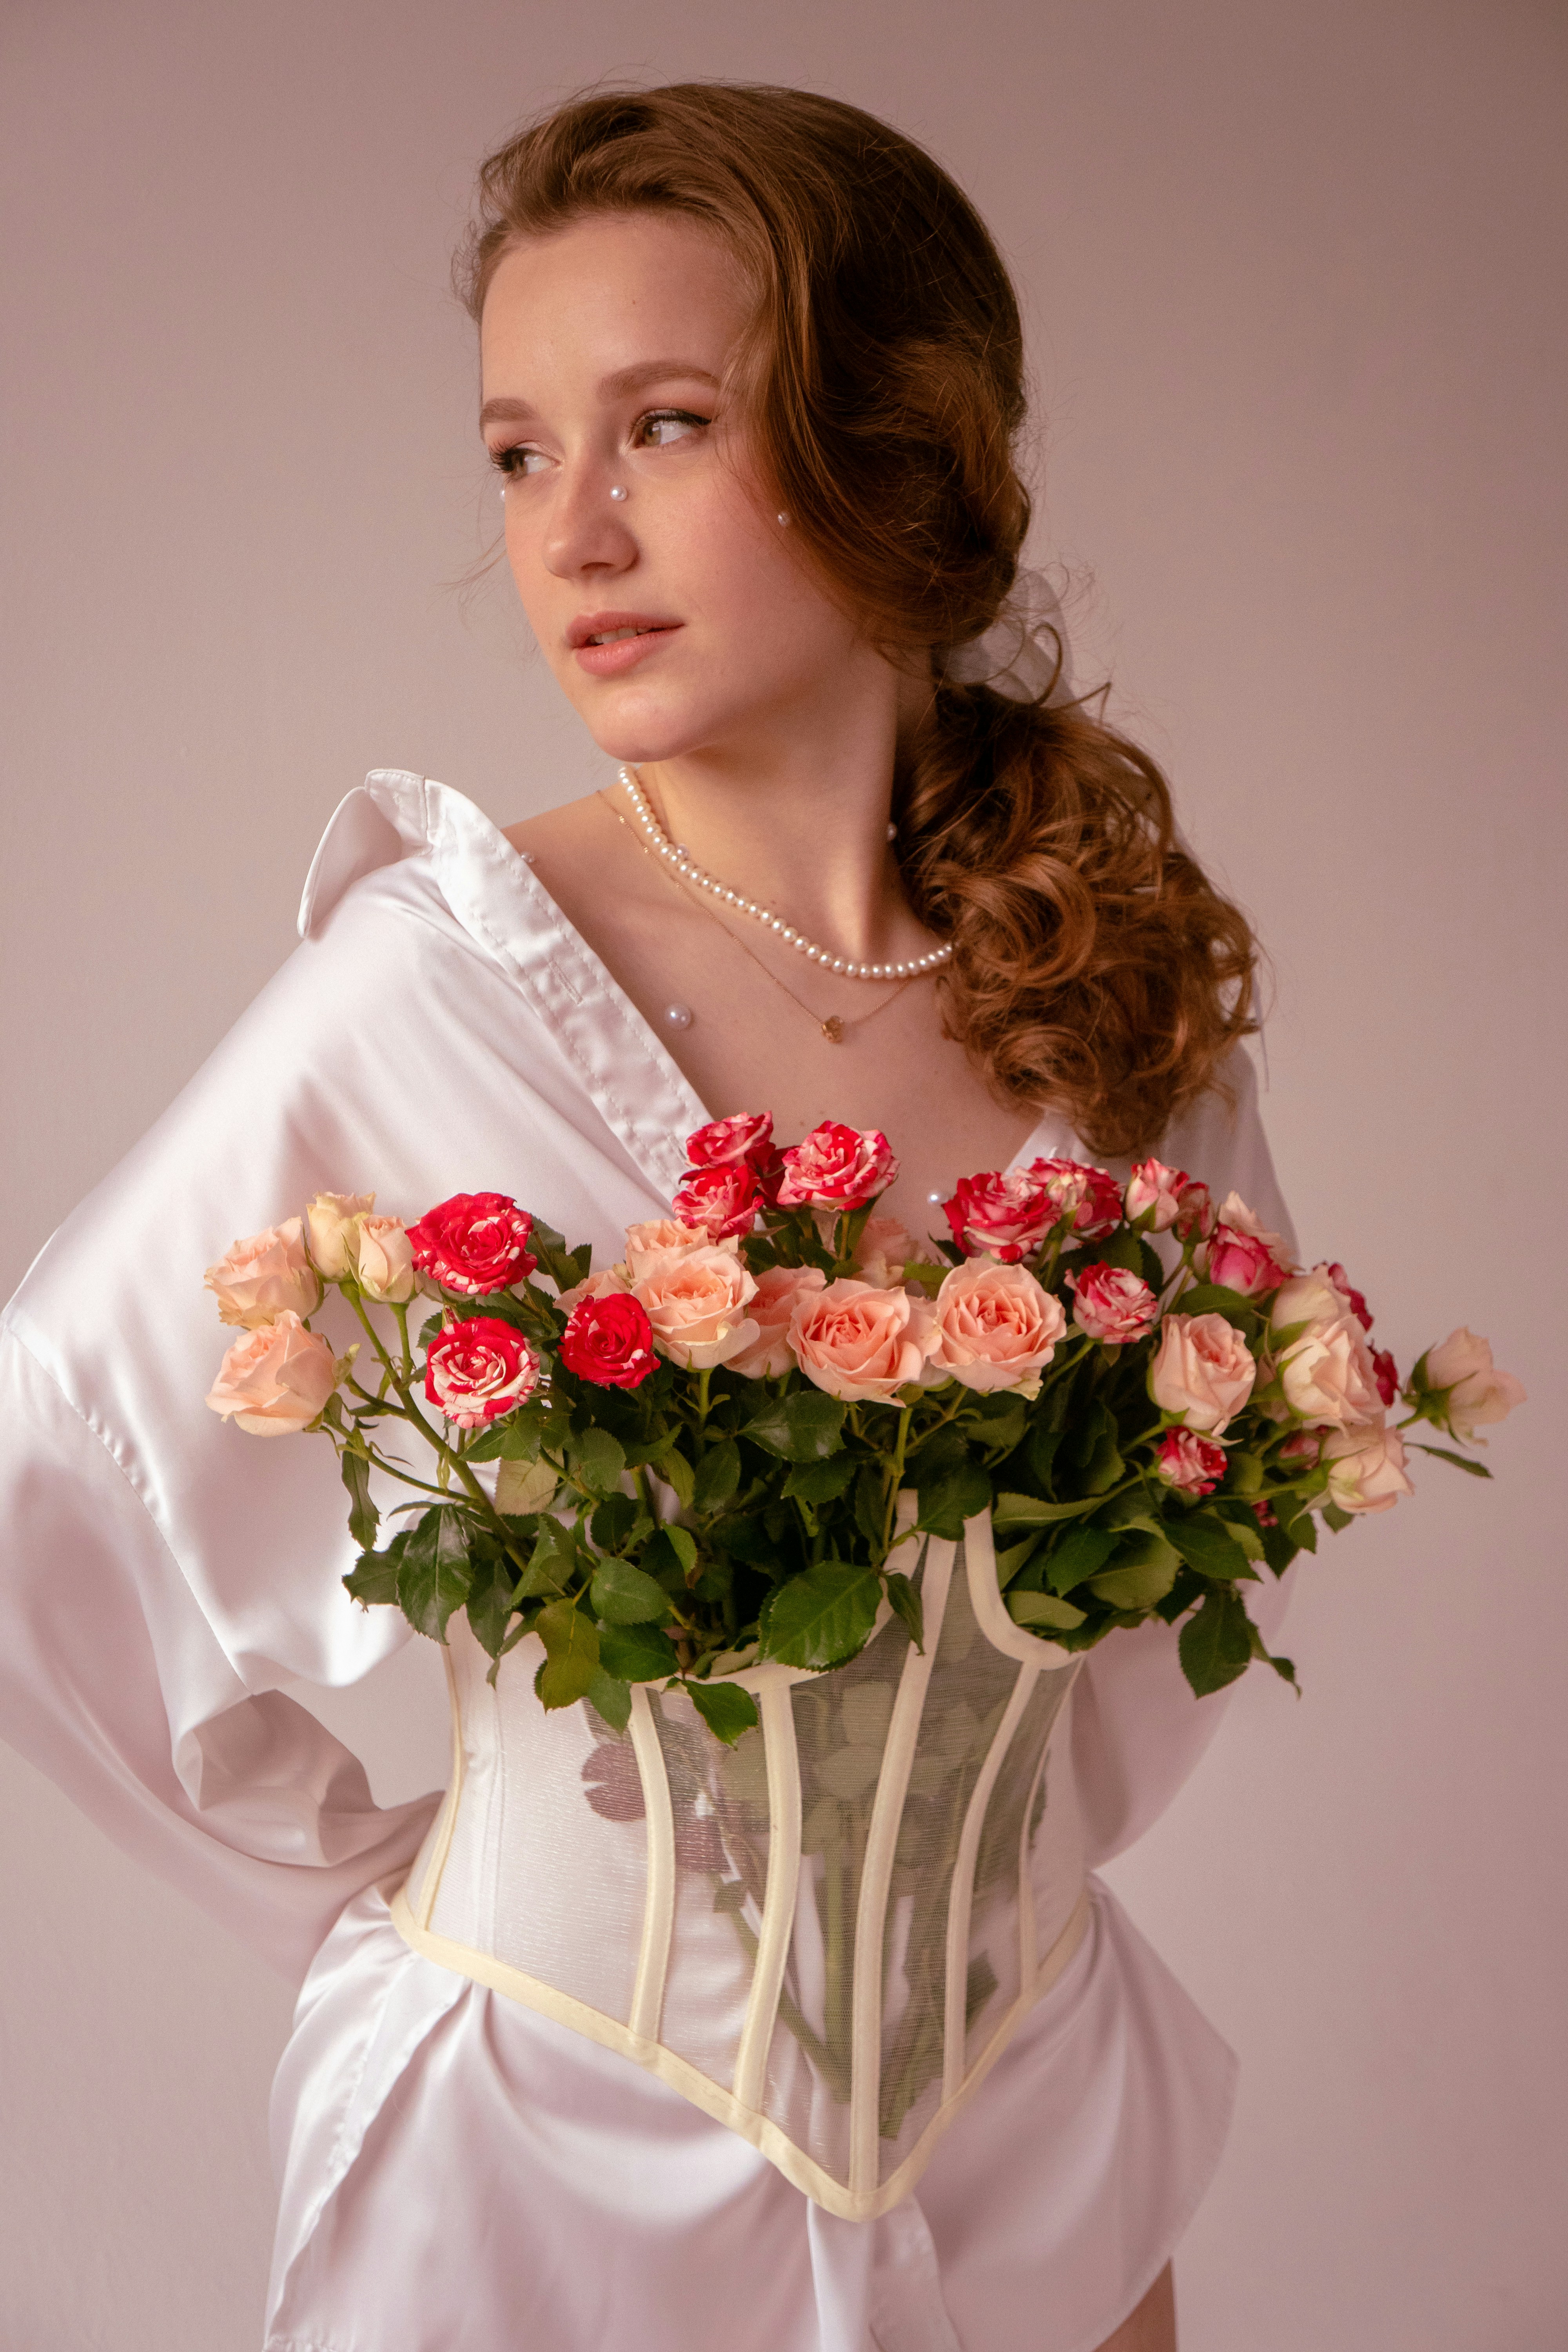 A tender girl in a white shirt in a corset with a bouquet of roses, with a make-up with pearls and a pearl necklace